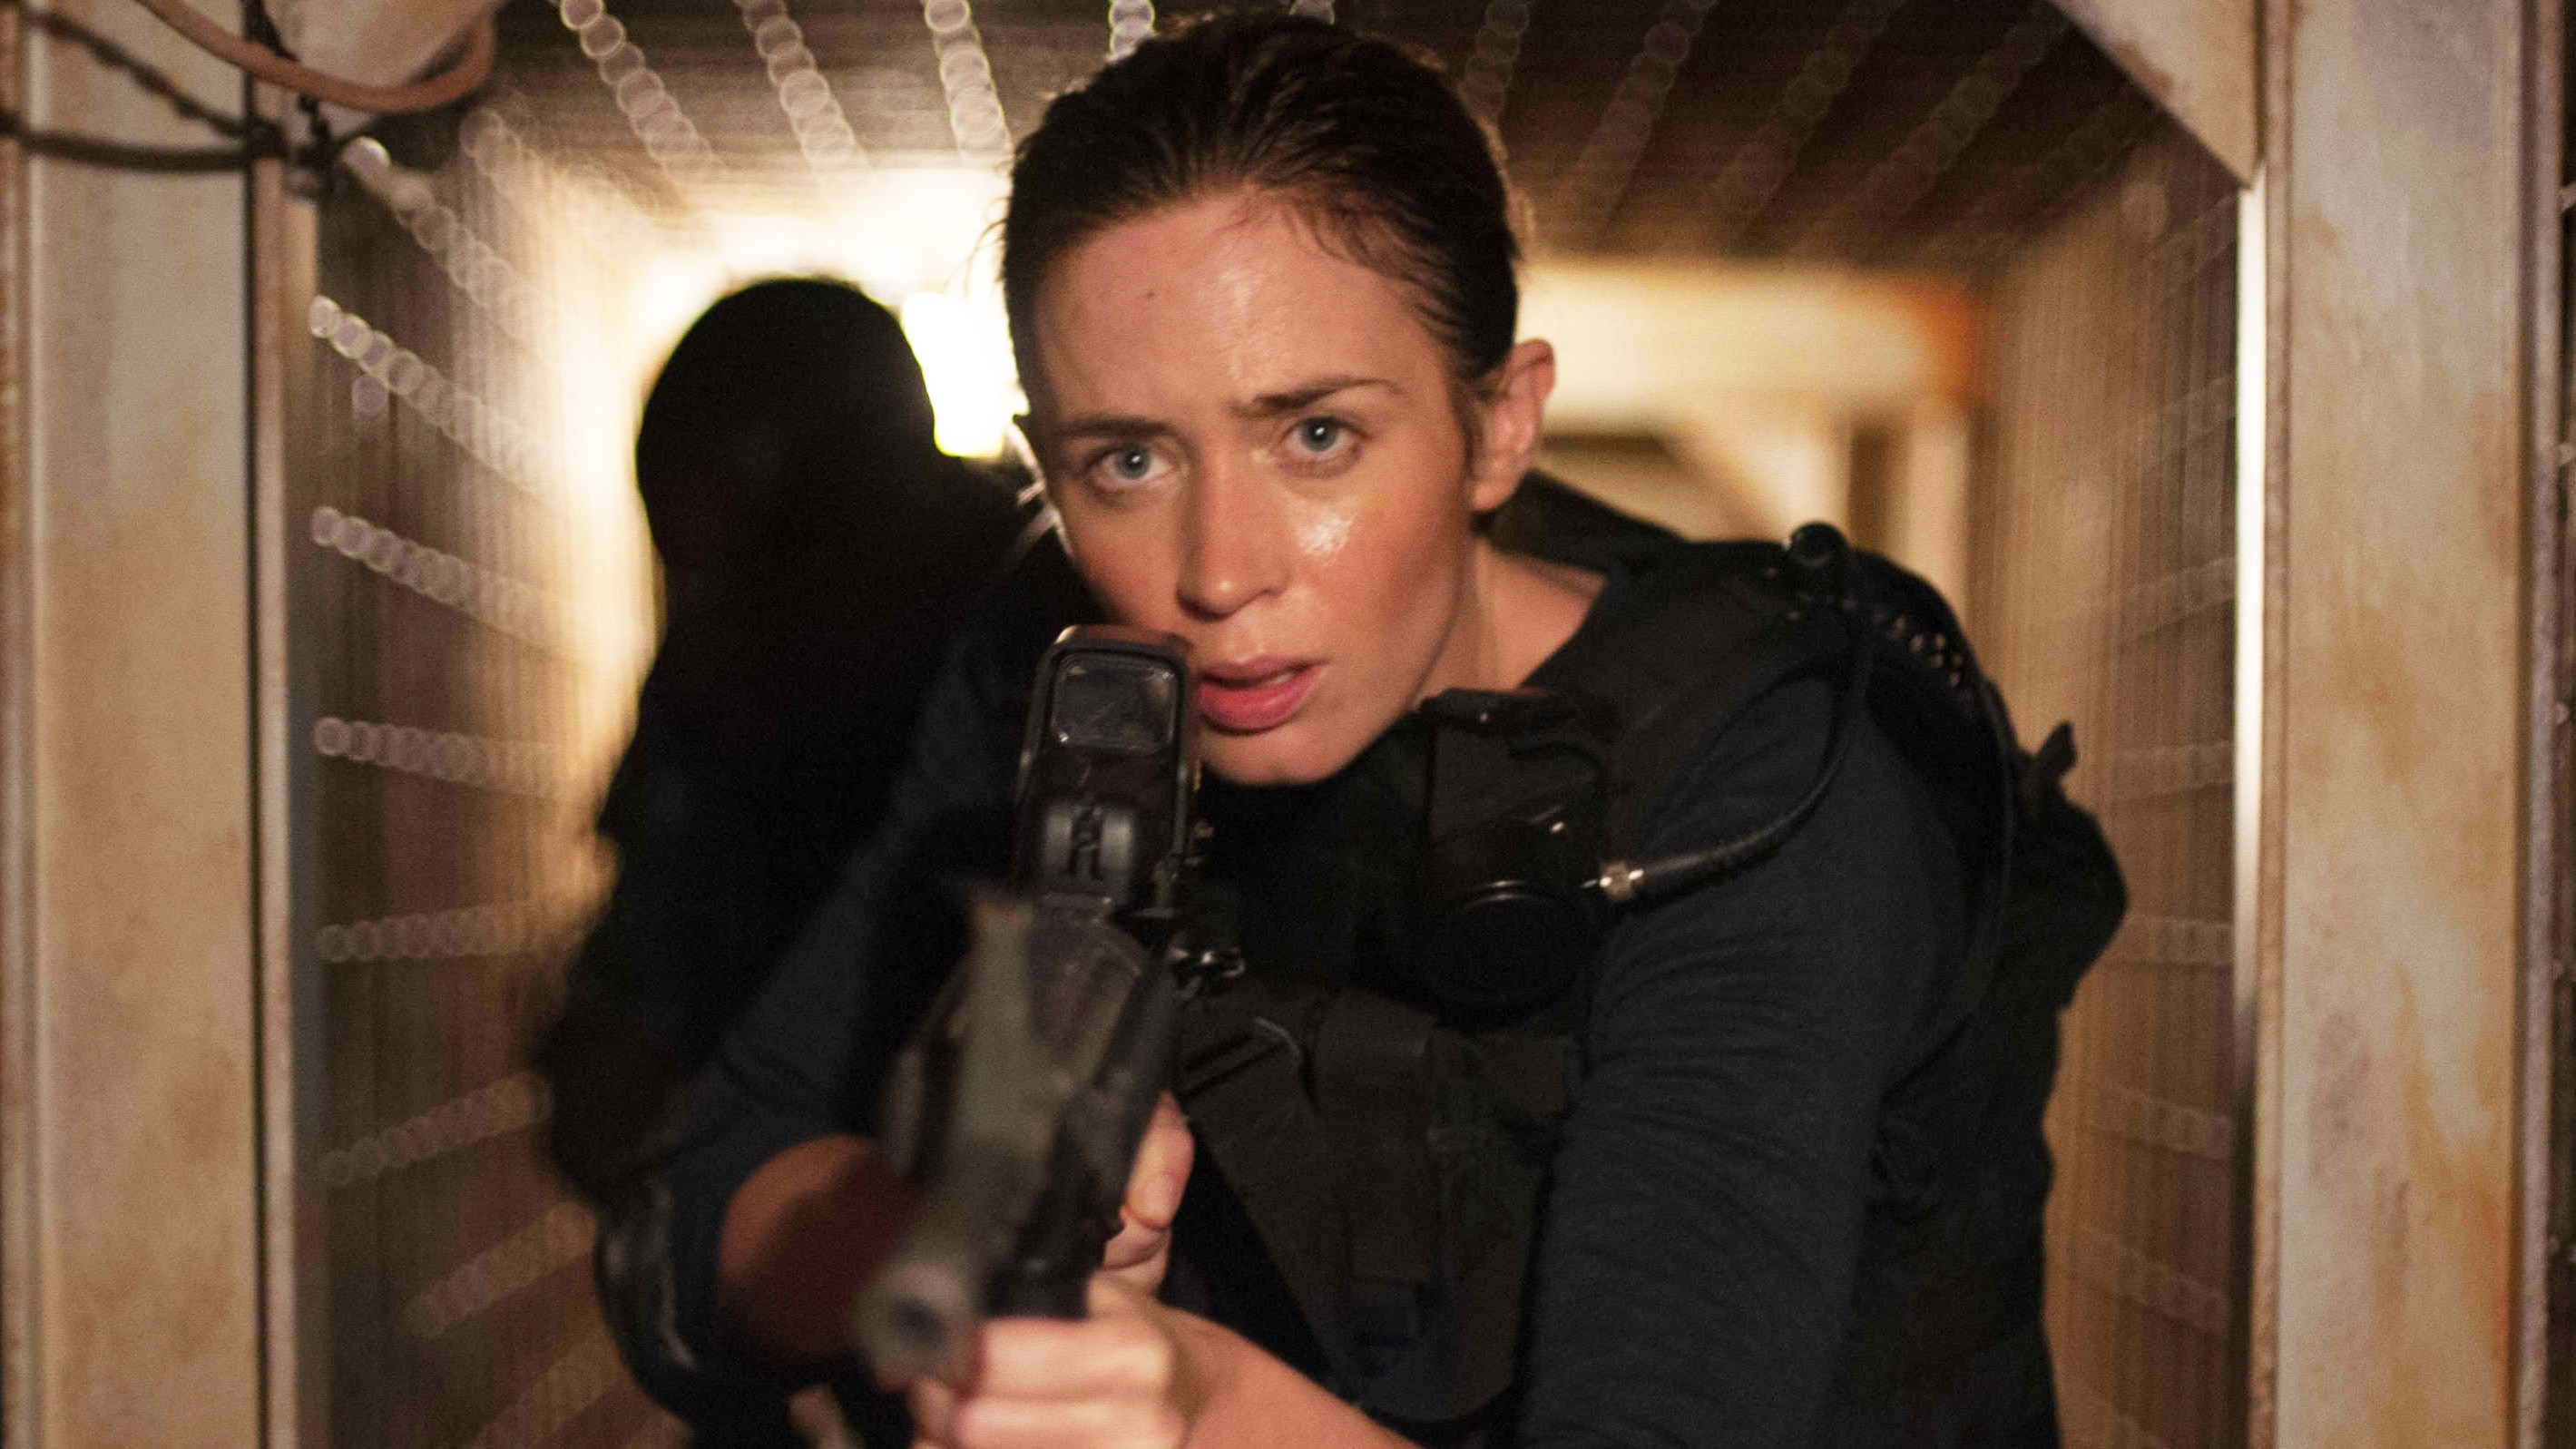 ‘SICARIO’ GIVES HARD QUESTIONS SIMPLE ANSWERS BY LAYING IT ON TOO THICK